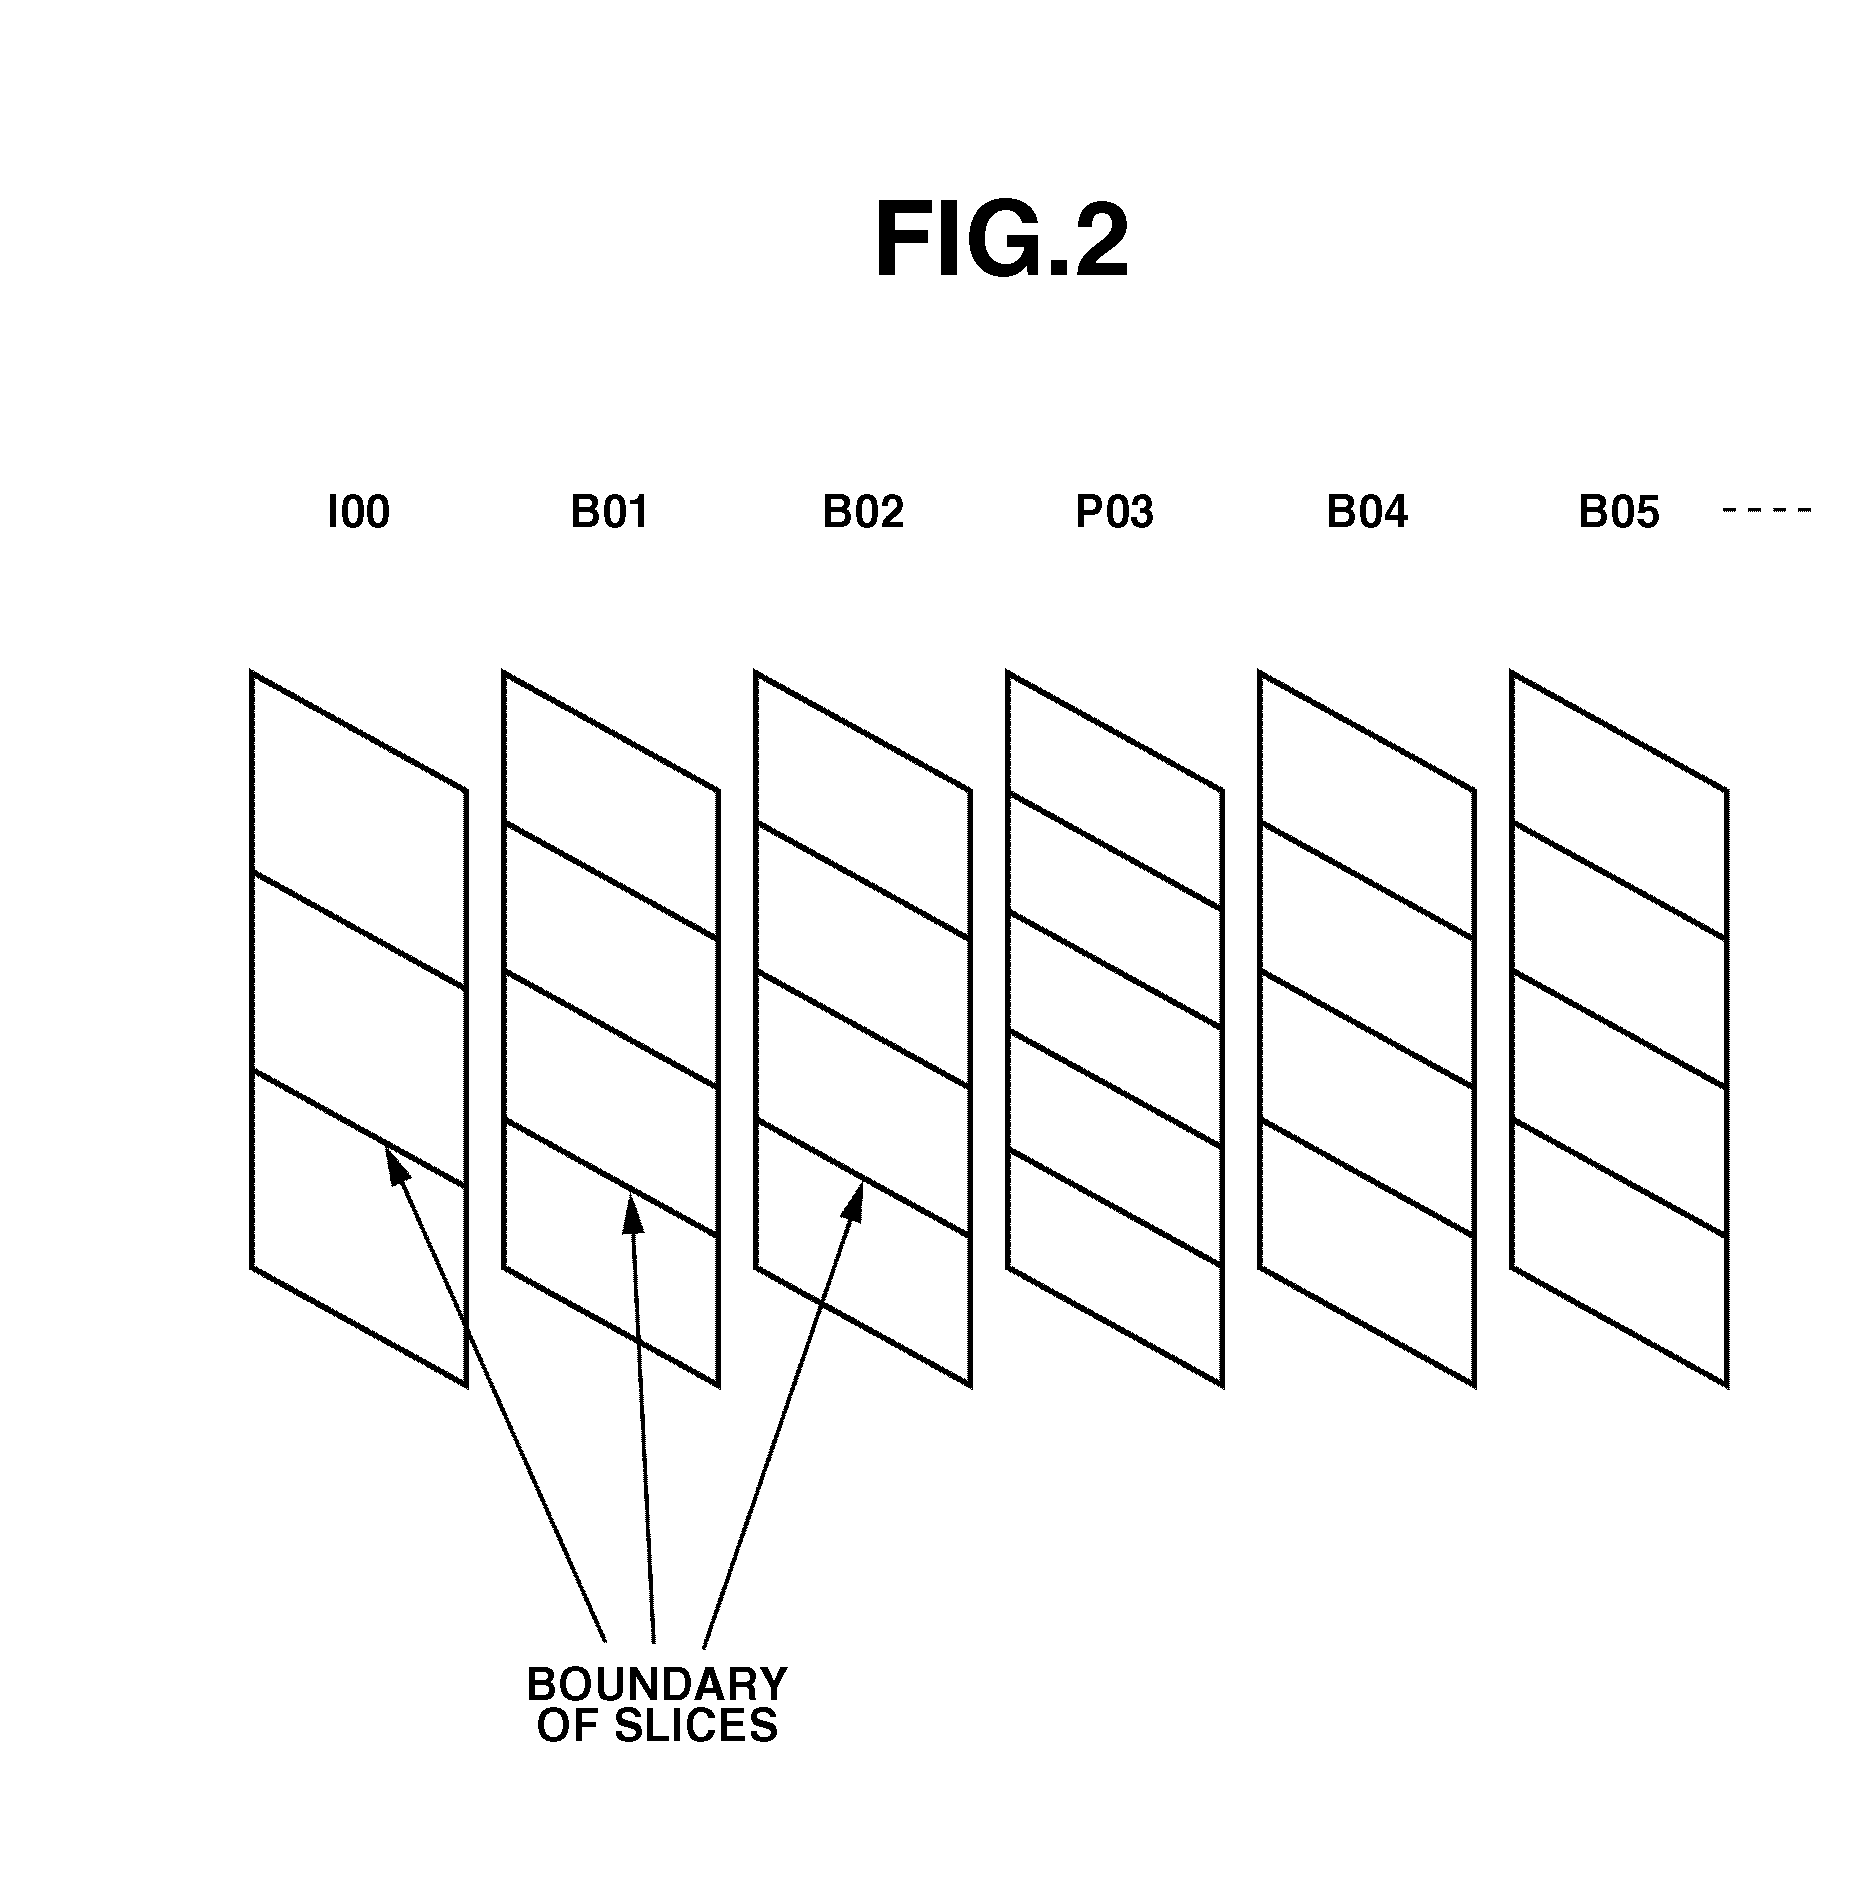 Image coding apparatus and method